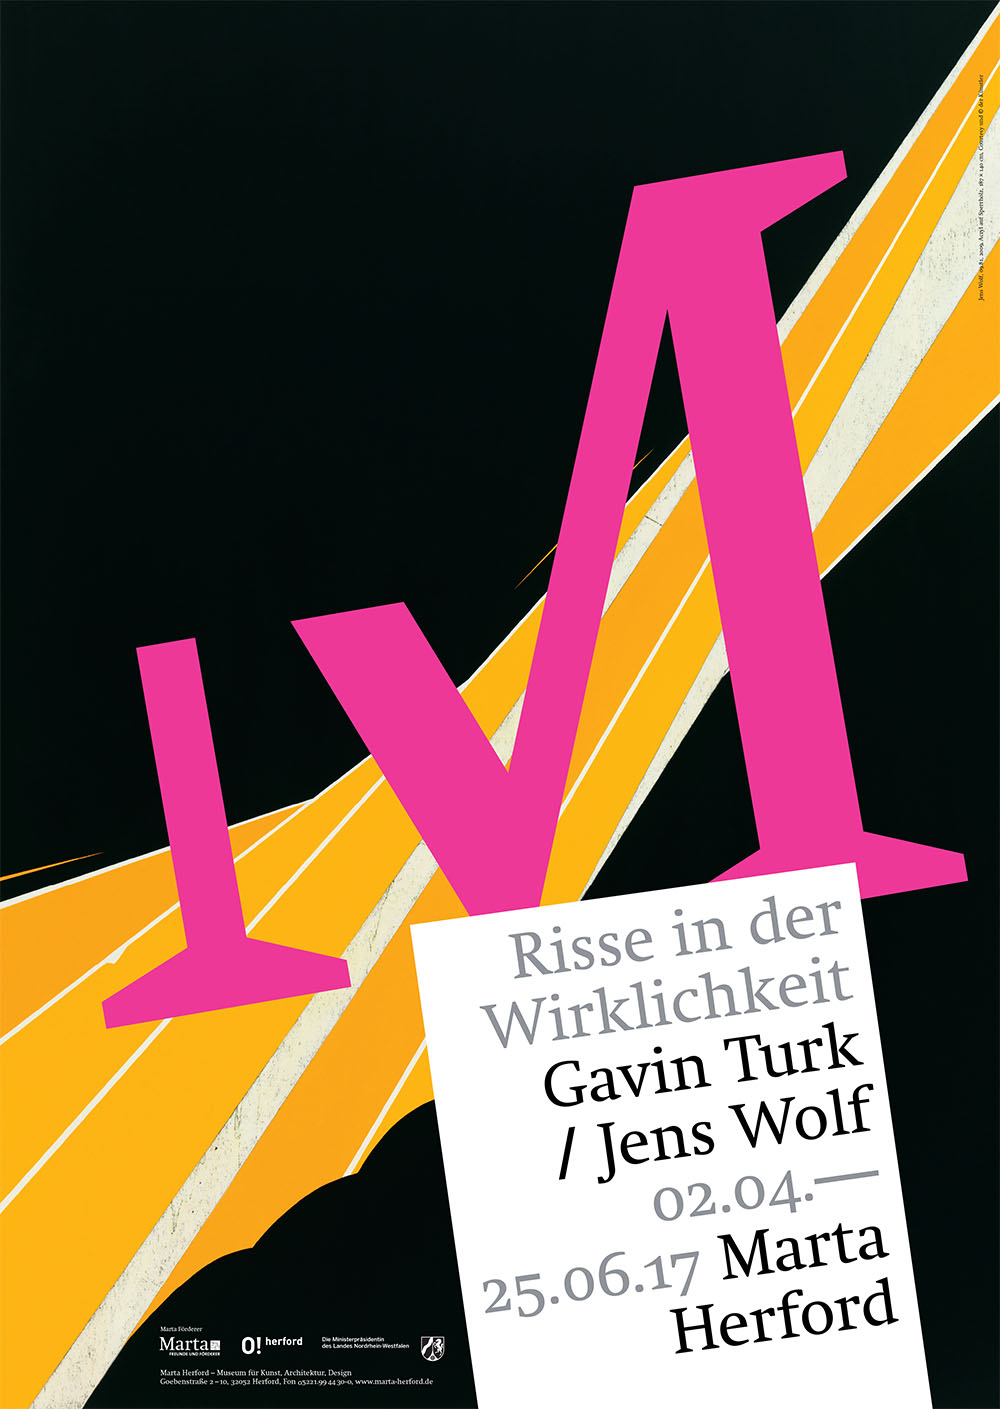 Jens Wolf: Exhibition "Cracks in Reality" (with Gavin Turk) at Marta Herford, DE